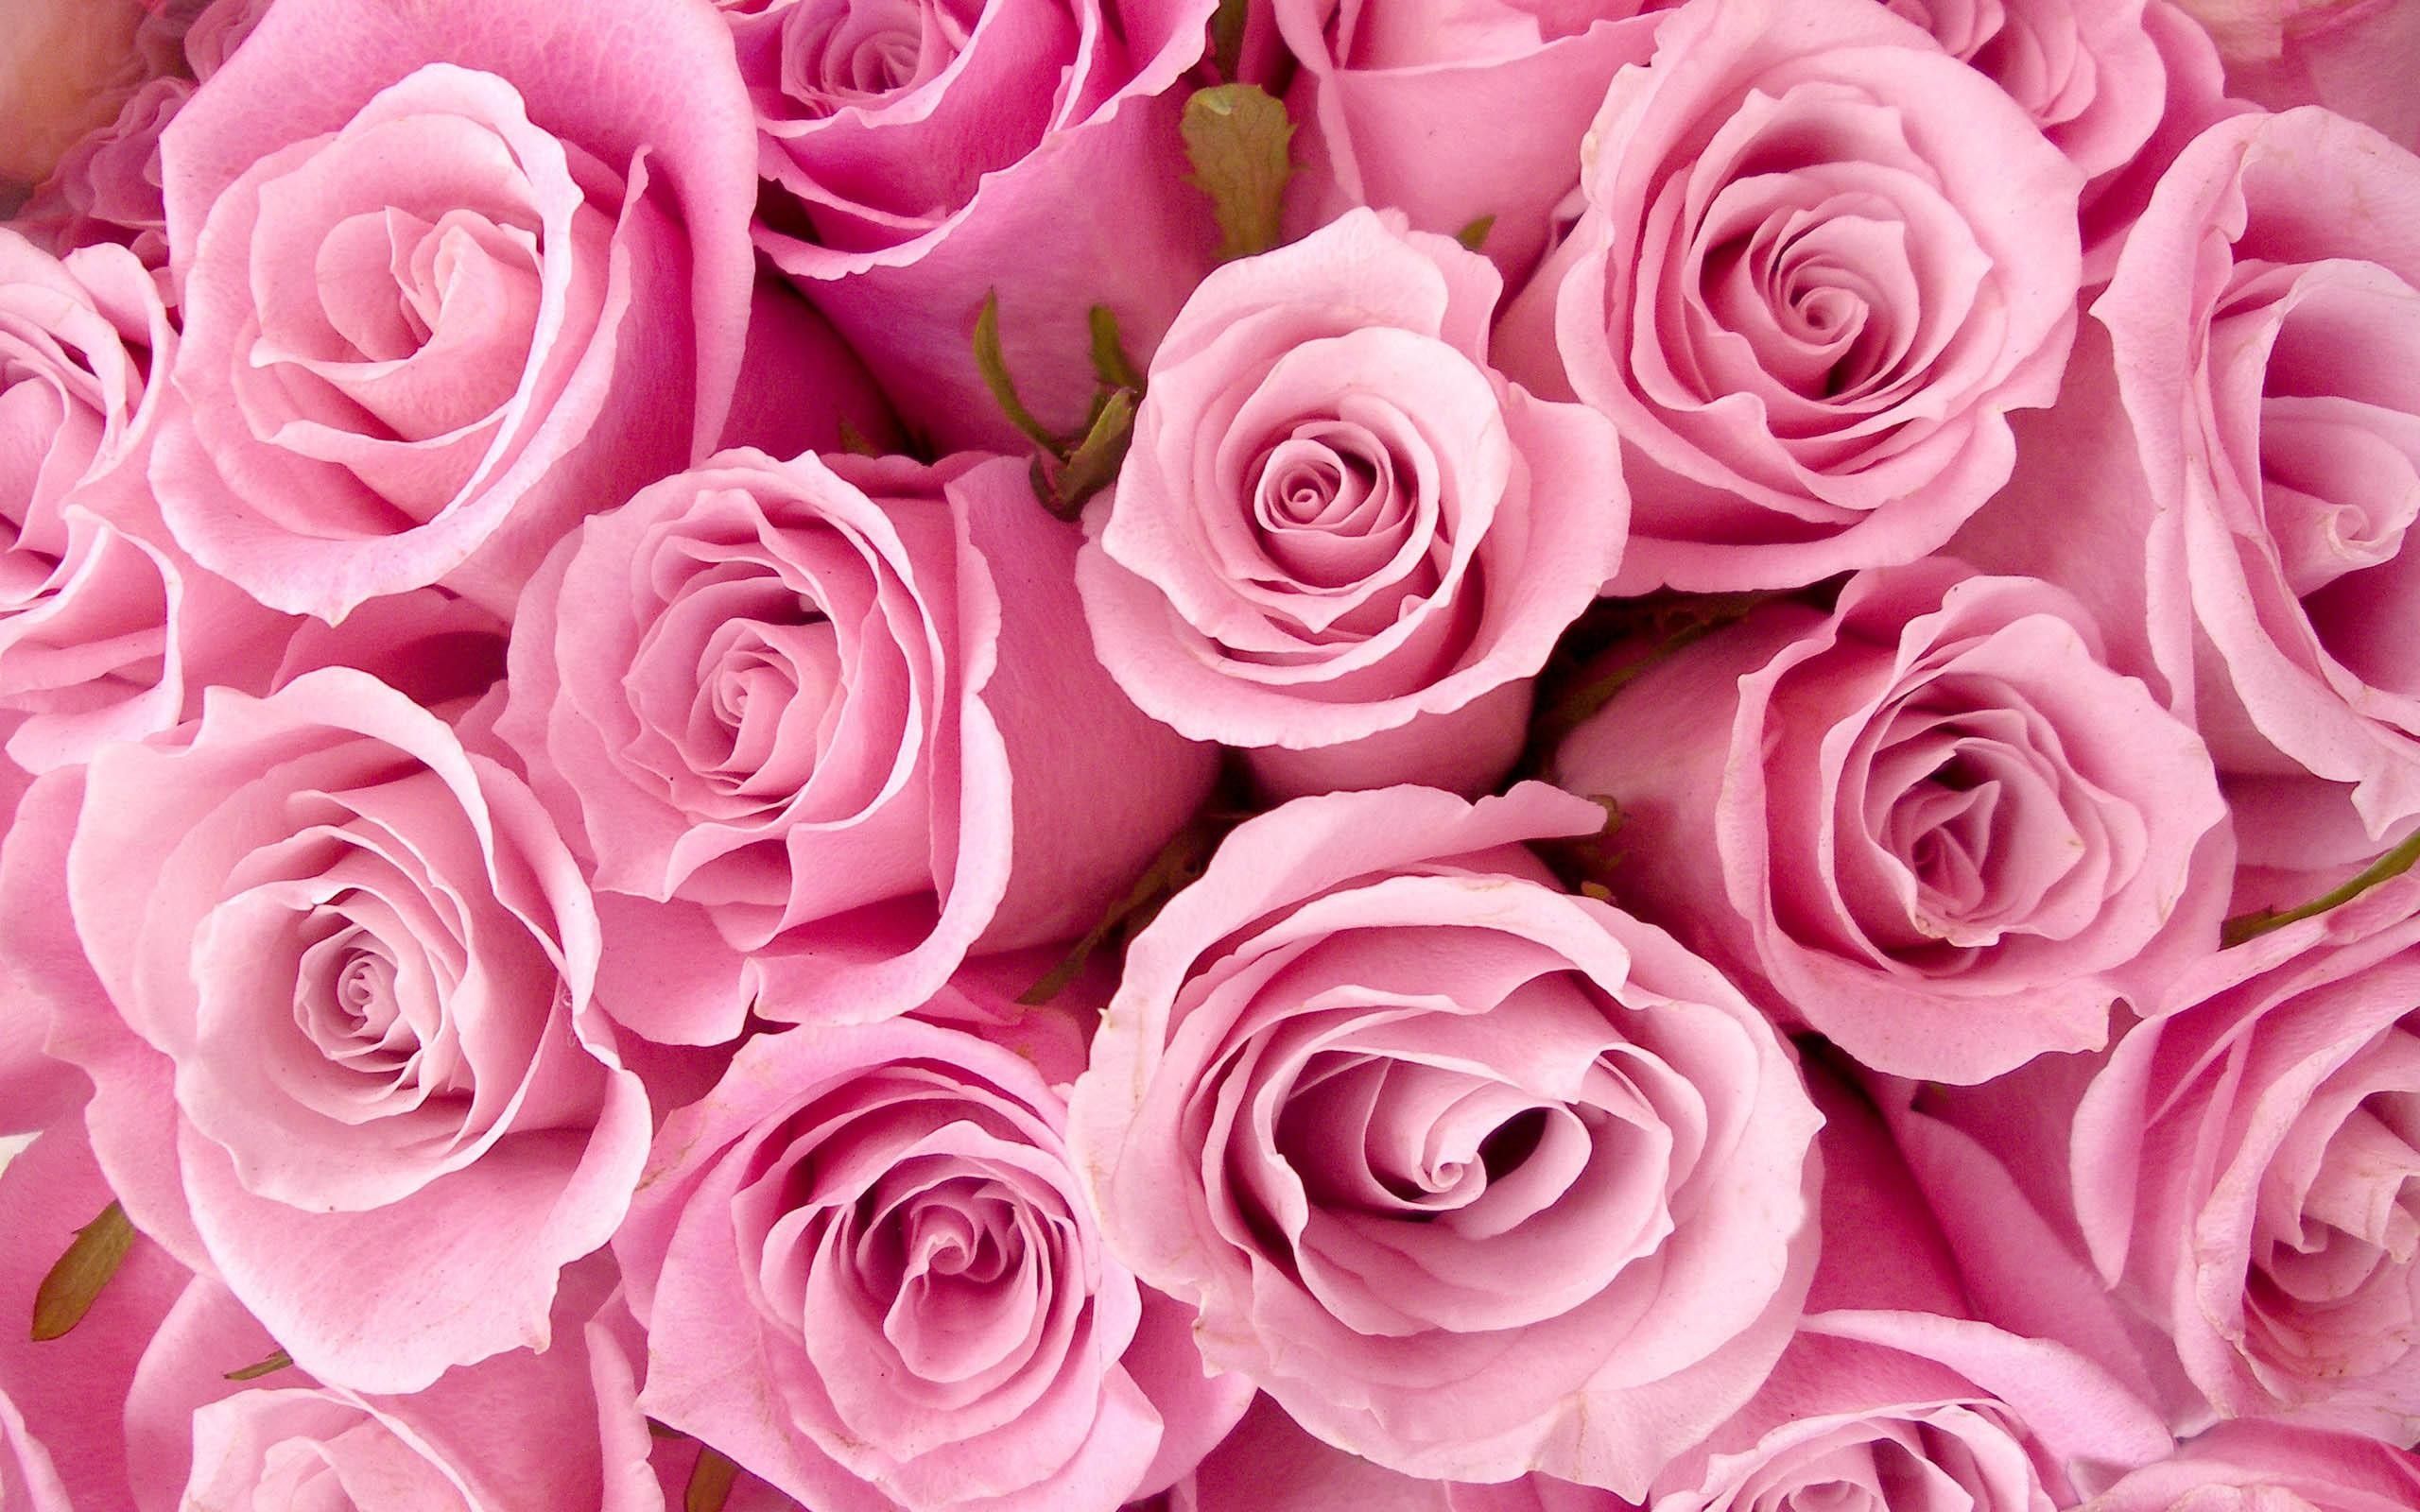 Pretty Pink Roses Wallpaper – Pink Color Photo 34590798 – Fanpop